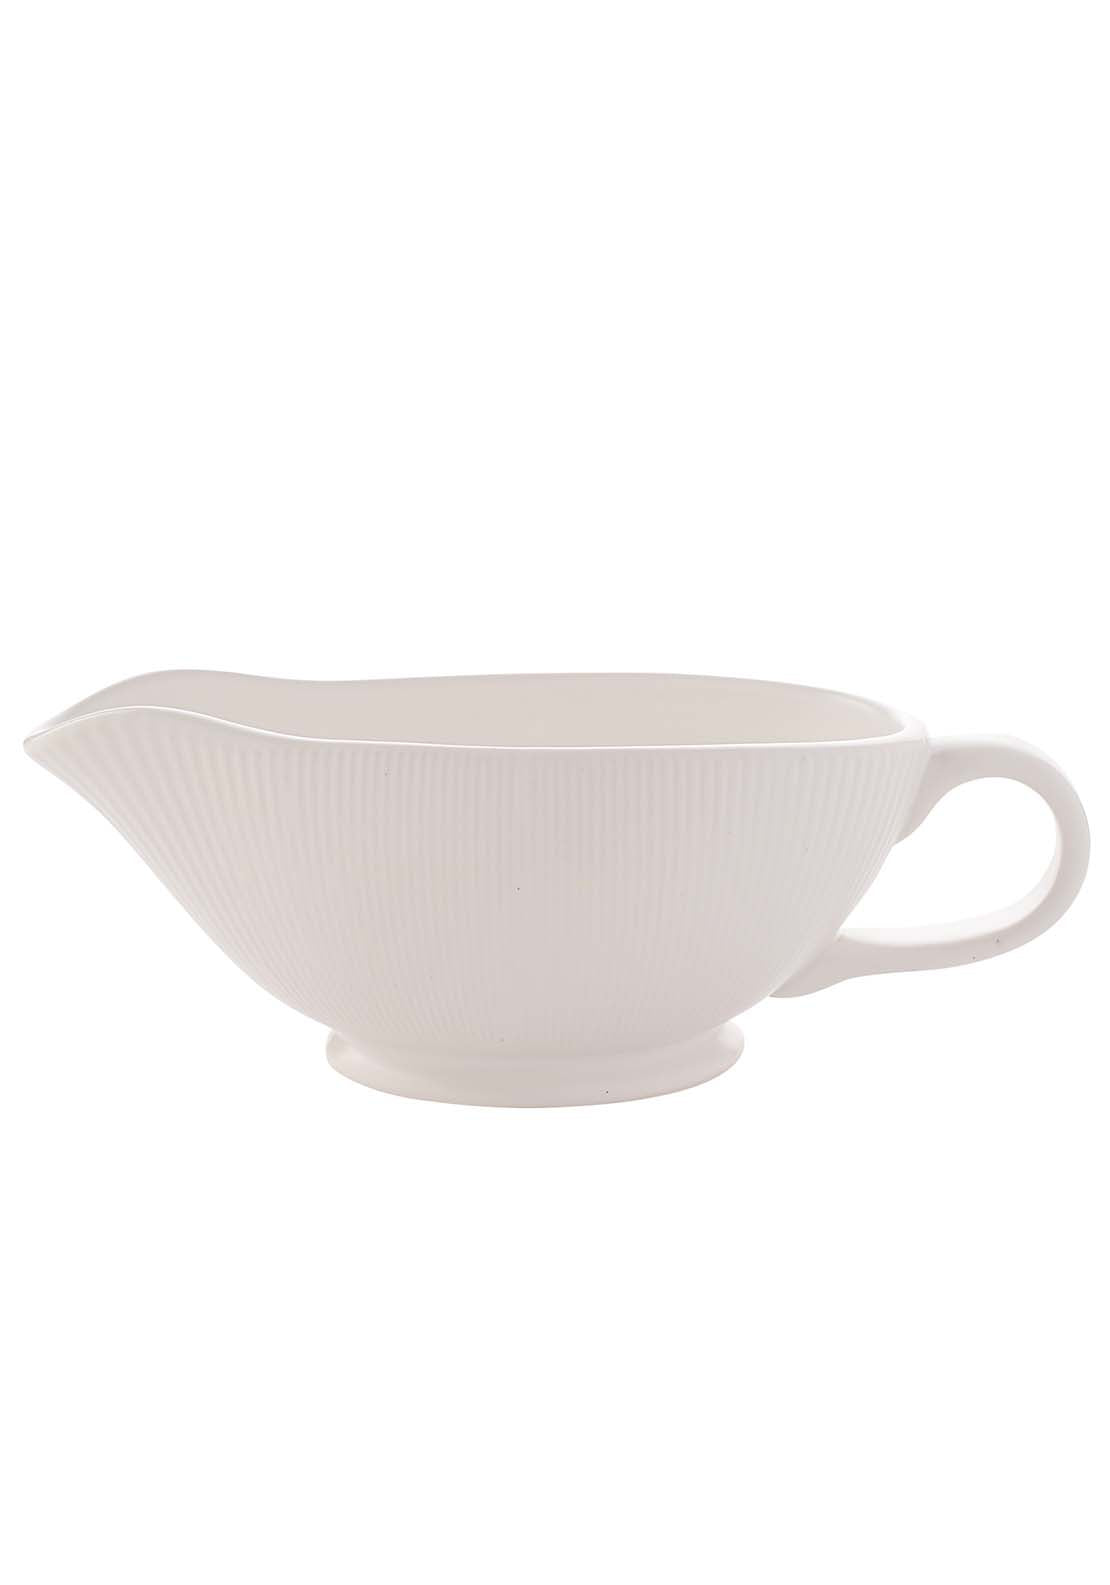 The Home Collection Ribbed Gravy Dish - White 1 Shaws Department Stores